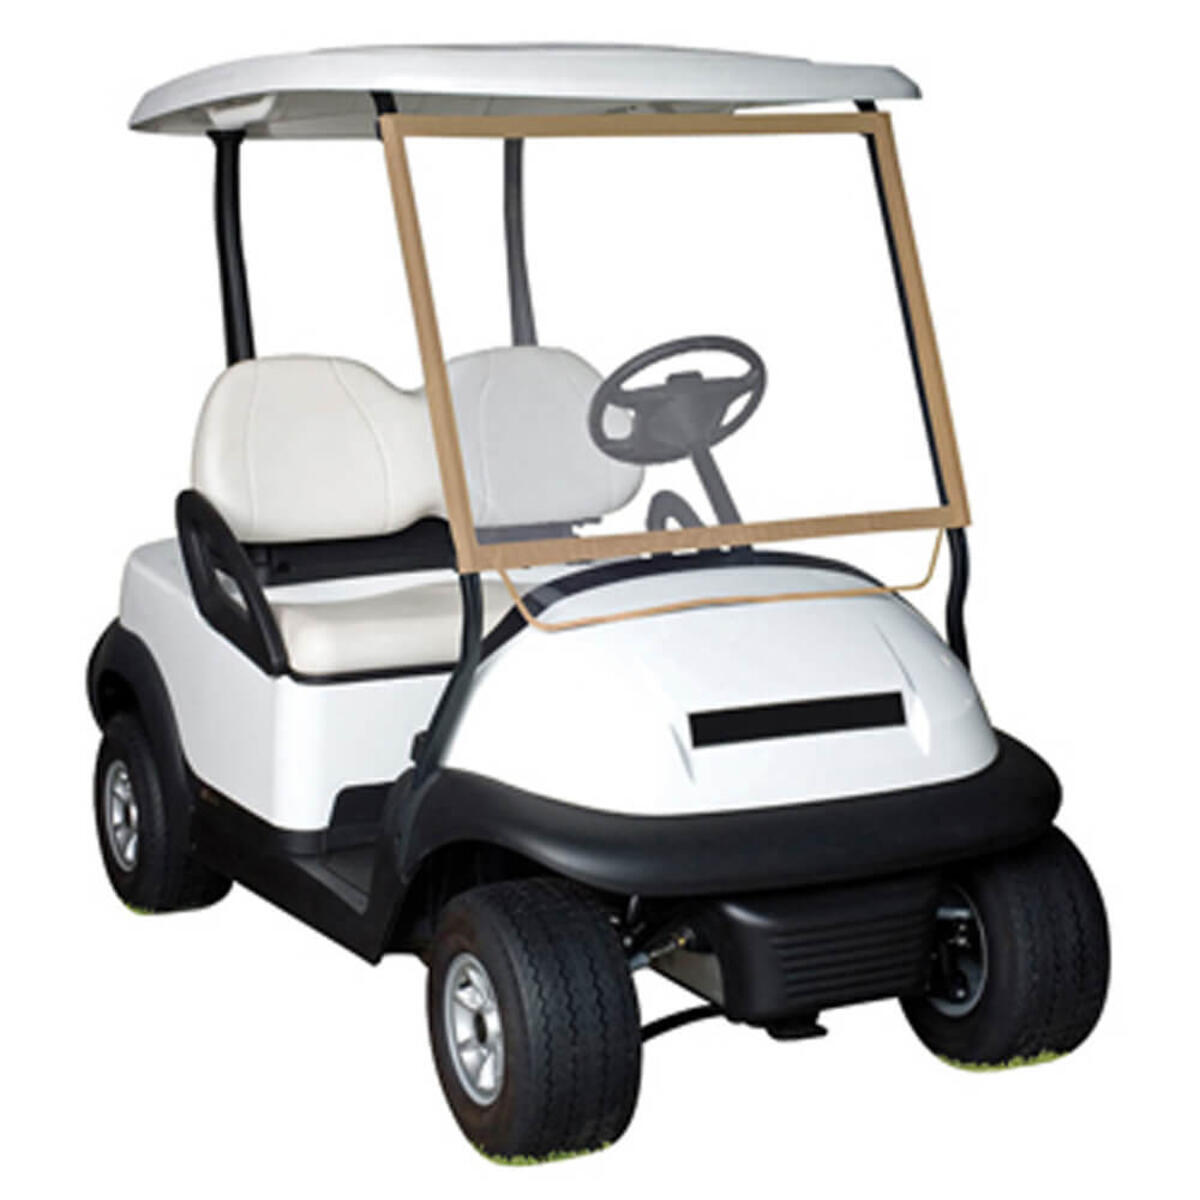 Classic Accessories Deluxe Portable Golf Cart Windshield Universal Fit